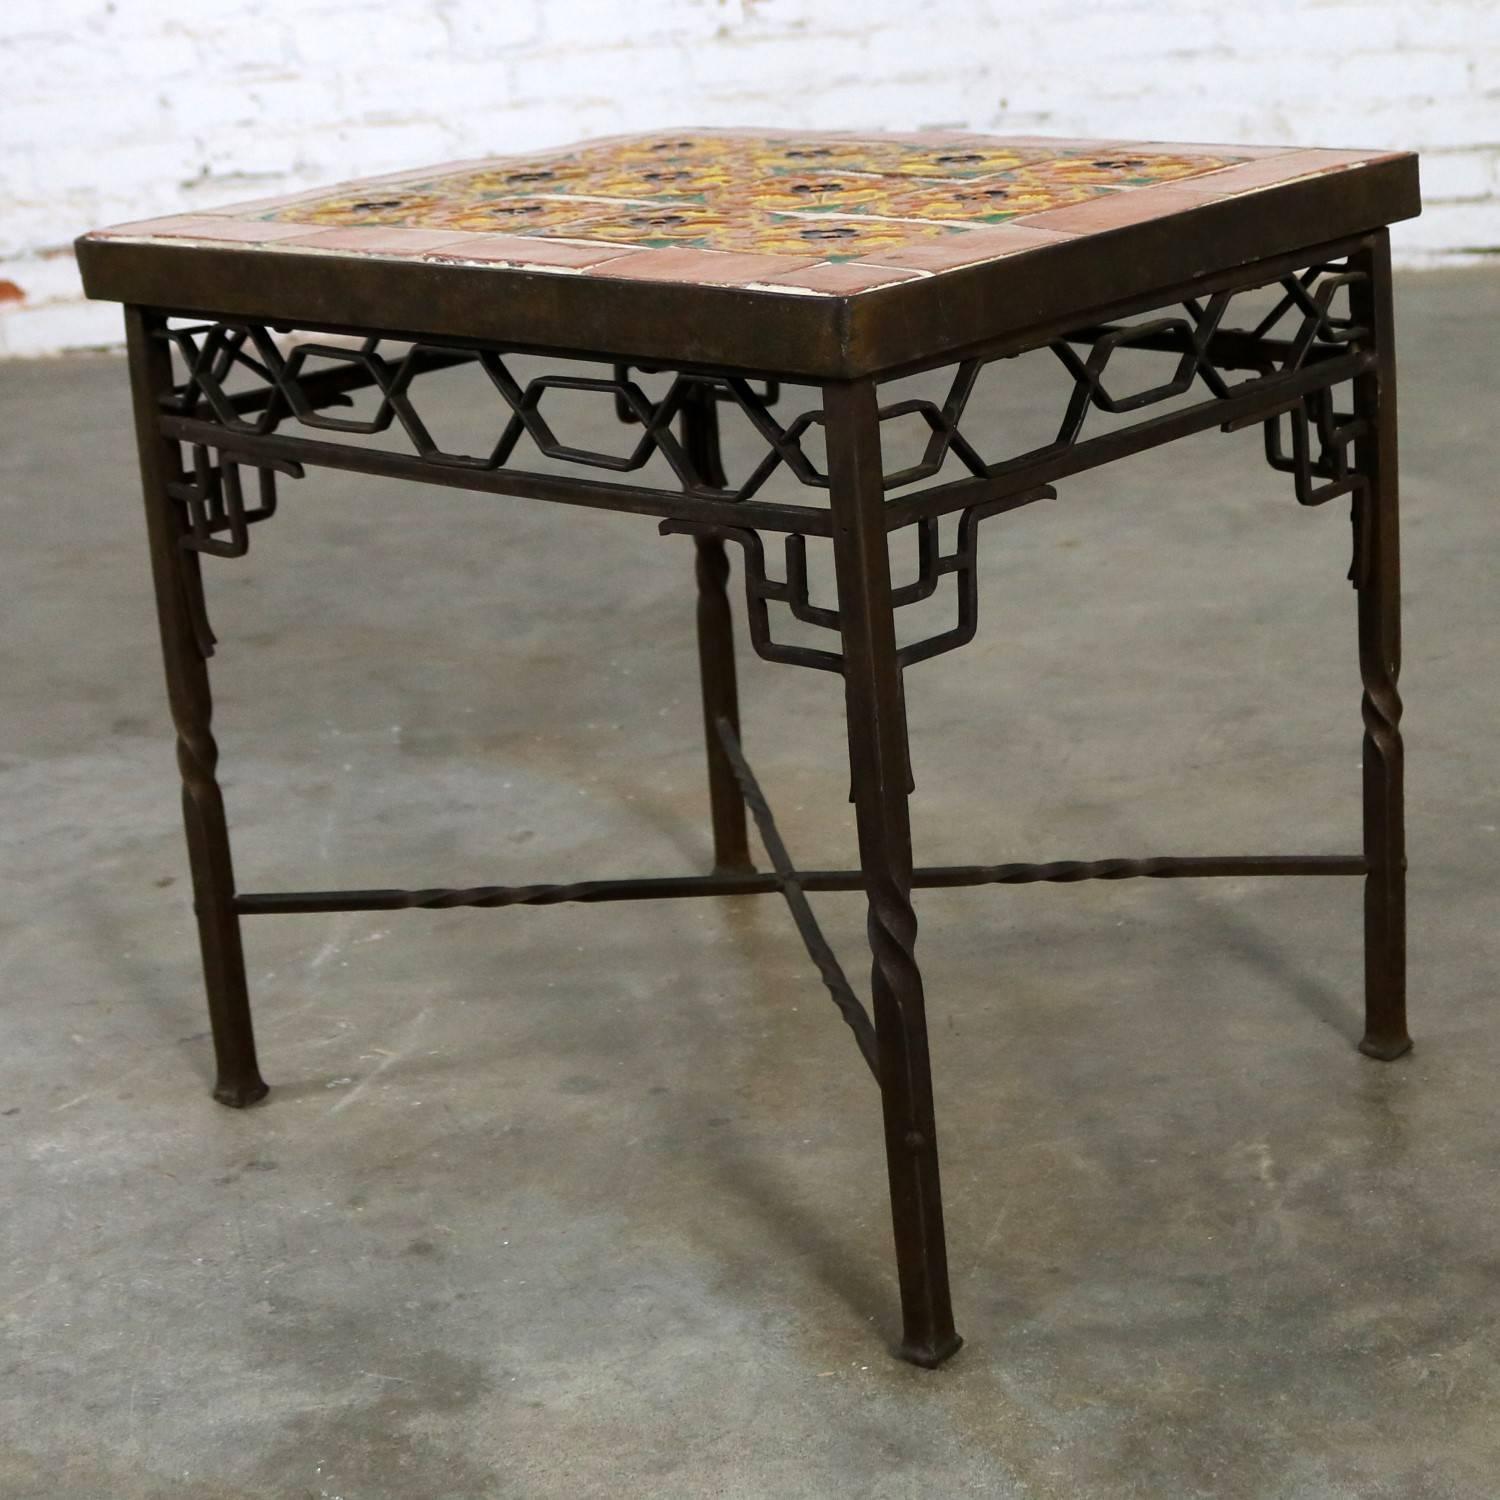 American Art Deco Wrought Iron and Tile Side Table California Style Tiles